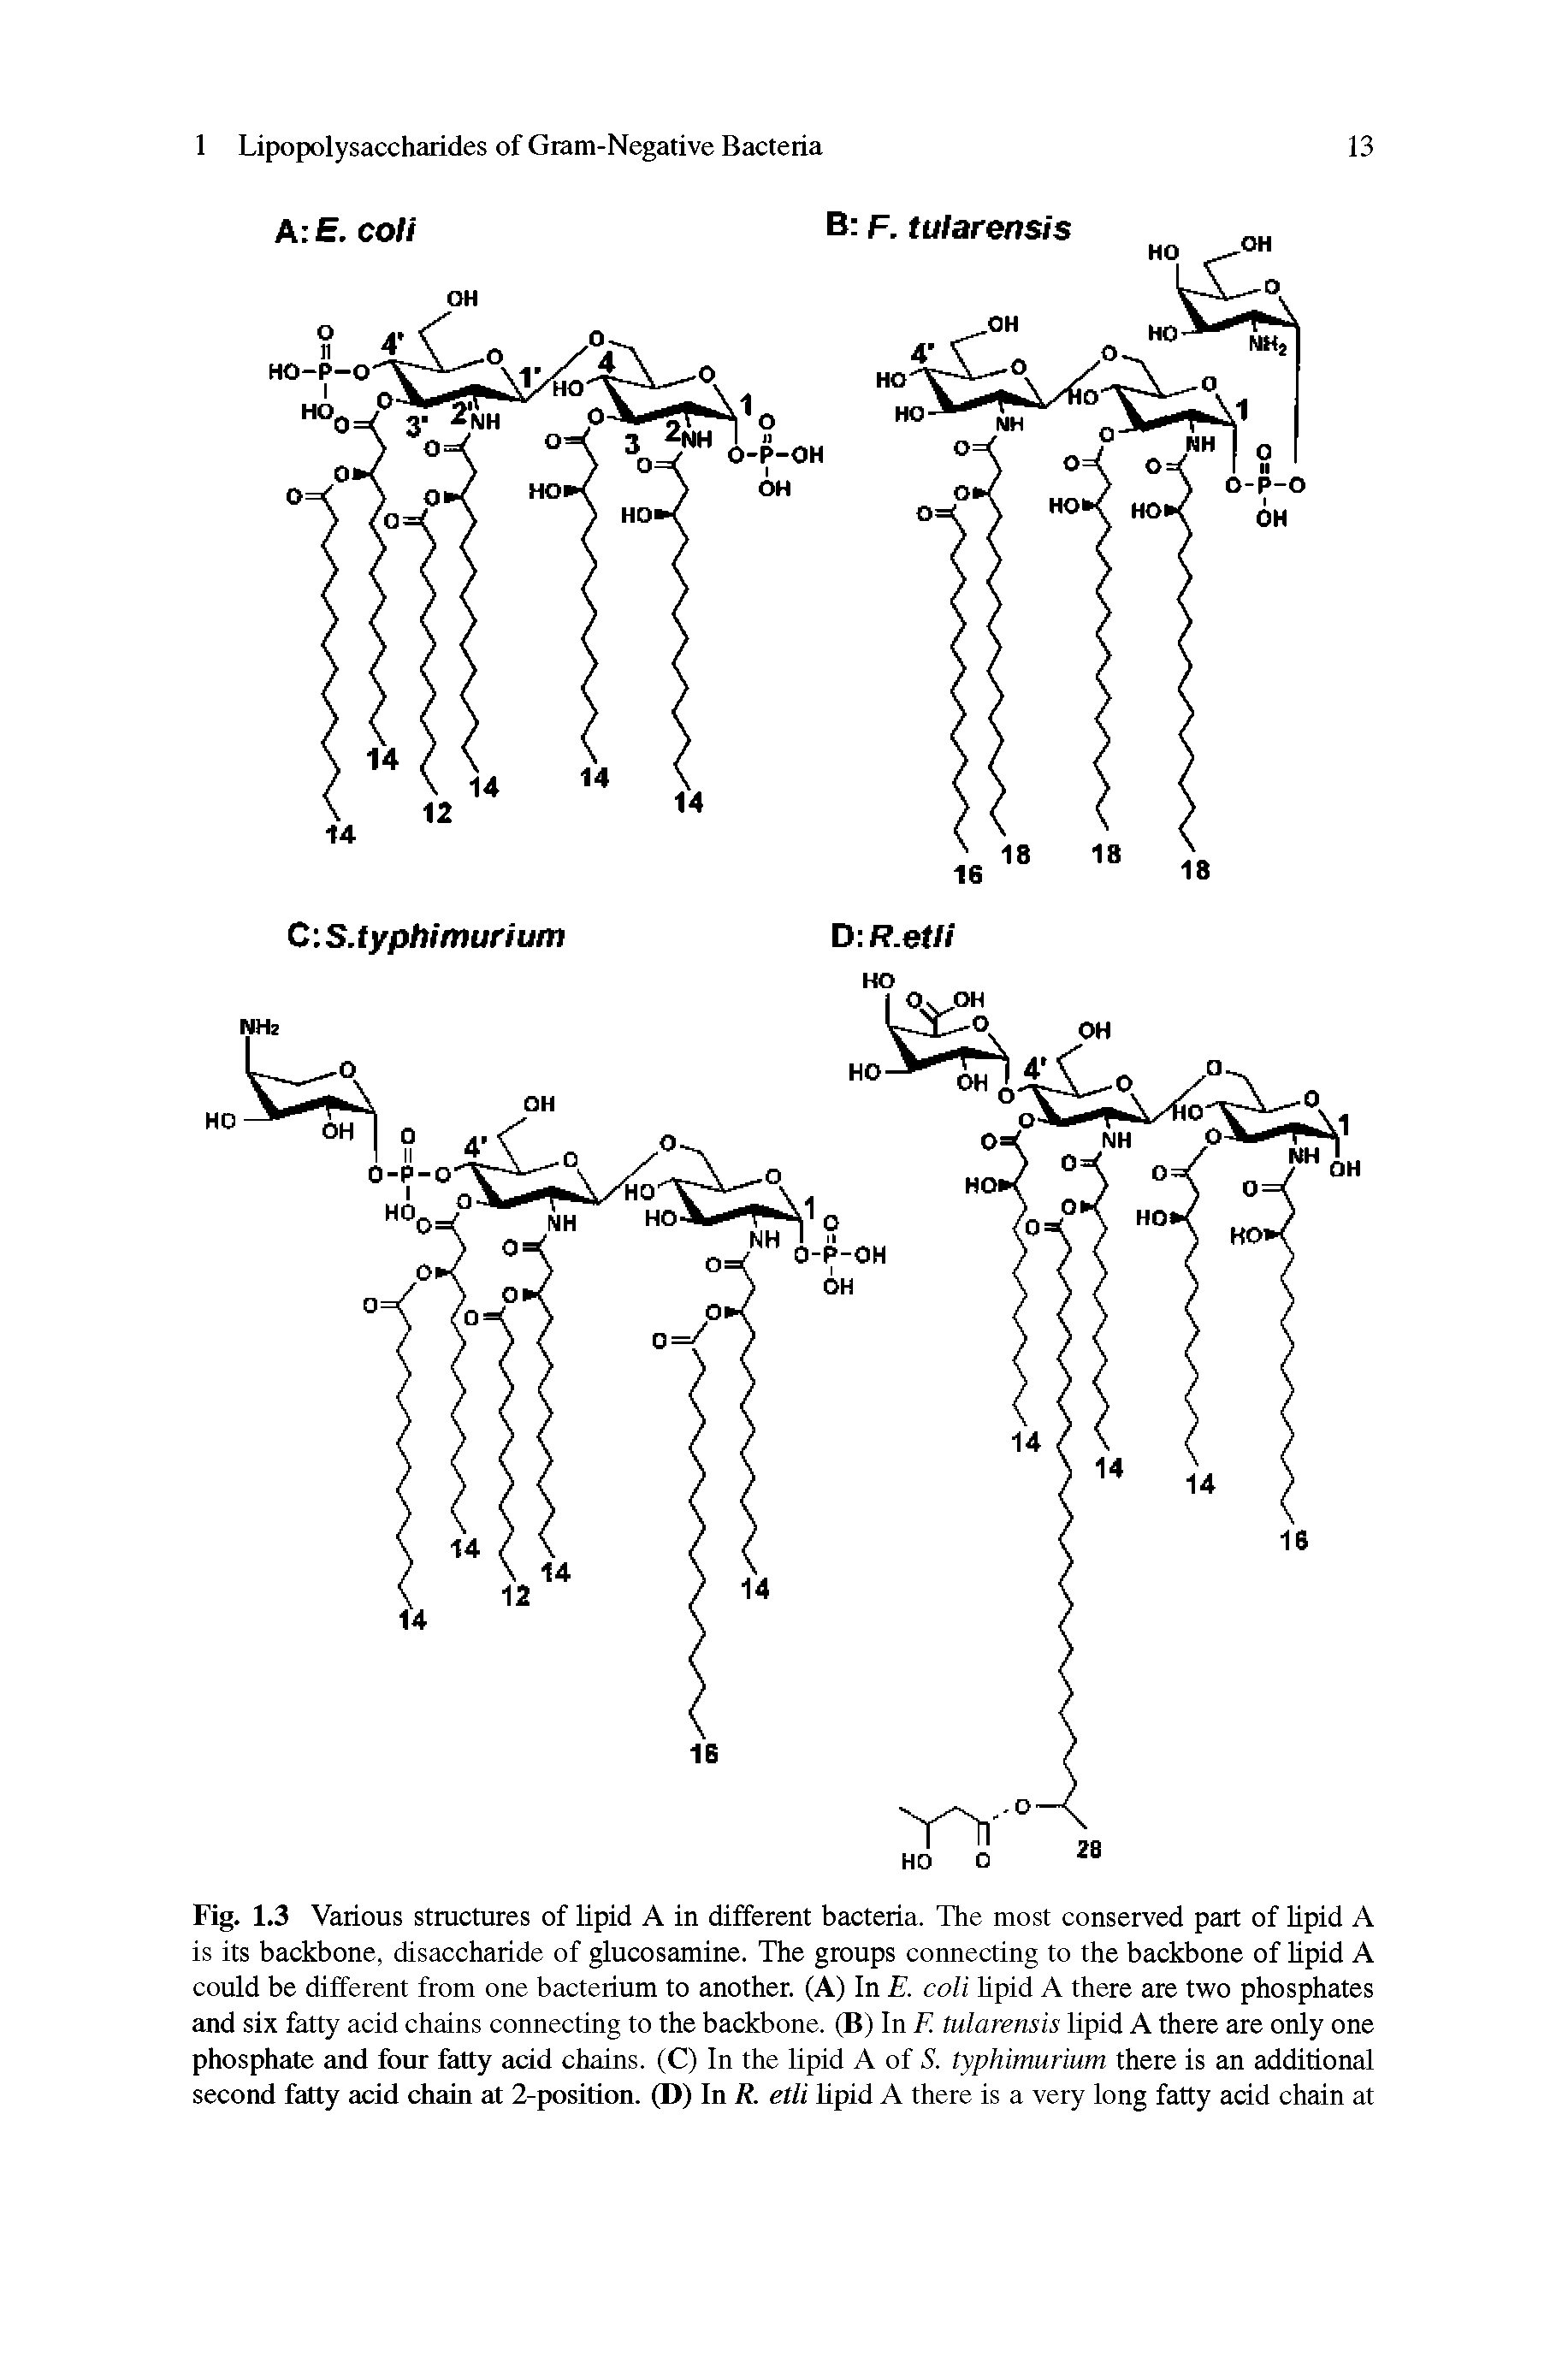 Fig. 1.3 Various structures of lipid A in different bacteria. The most conserved part of lipid A is its backbone, disaccharide of glucosamine. The groups connecting to the backbone of lipid A could be different from one bacterium to another. (A) In E. coli lipid A there are two phosphates and six fatty acid chains connecting to the backbone. (B) In F. tularensis lipid A there are only one phosphate and four fatty acid chains. (C) In the lipid A of S. typhimurium there is an additional second fatty acid chain at 2-position. (D) In R. etli lipid A there is a very long fatty acid chain at...